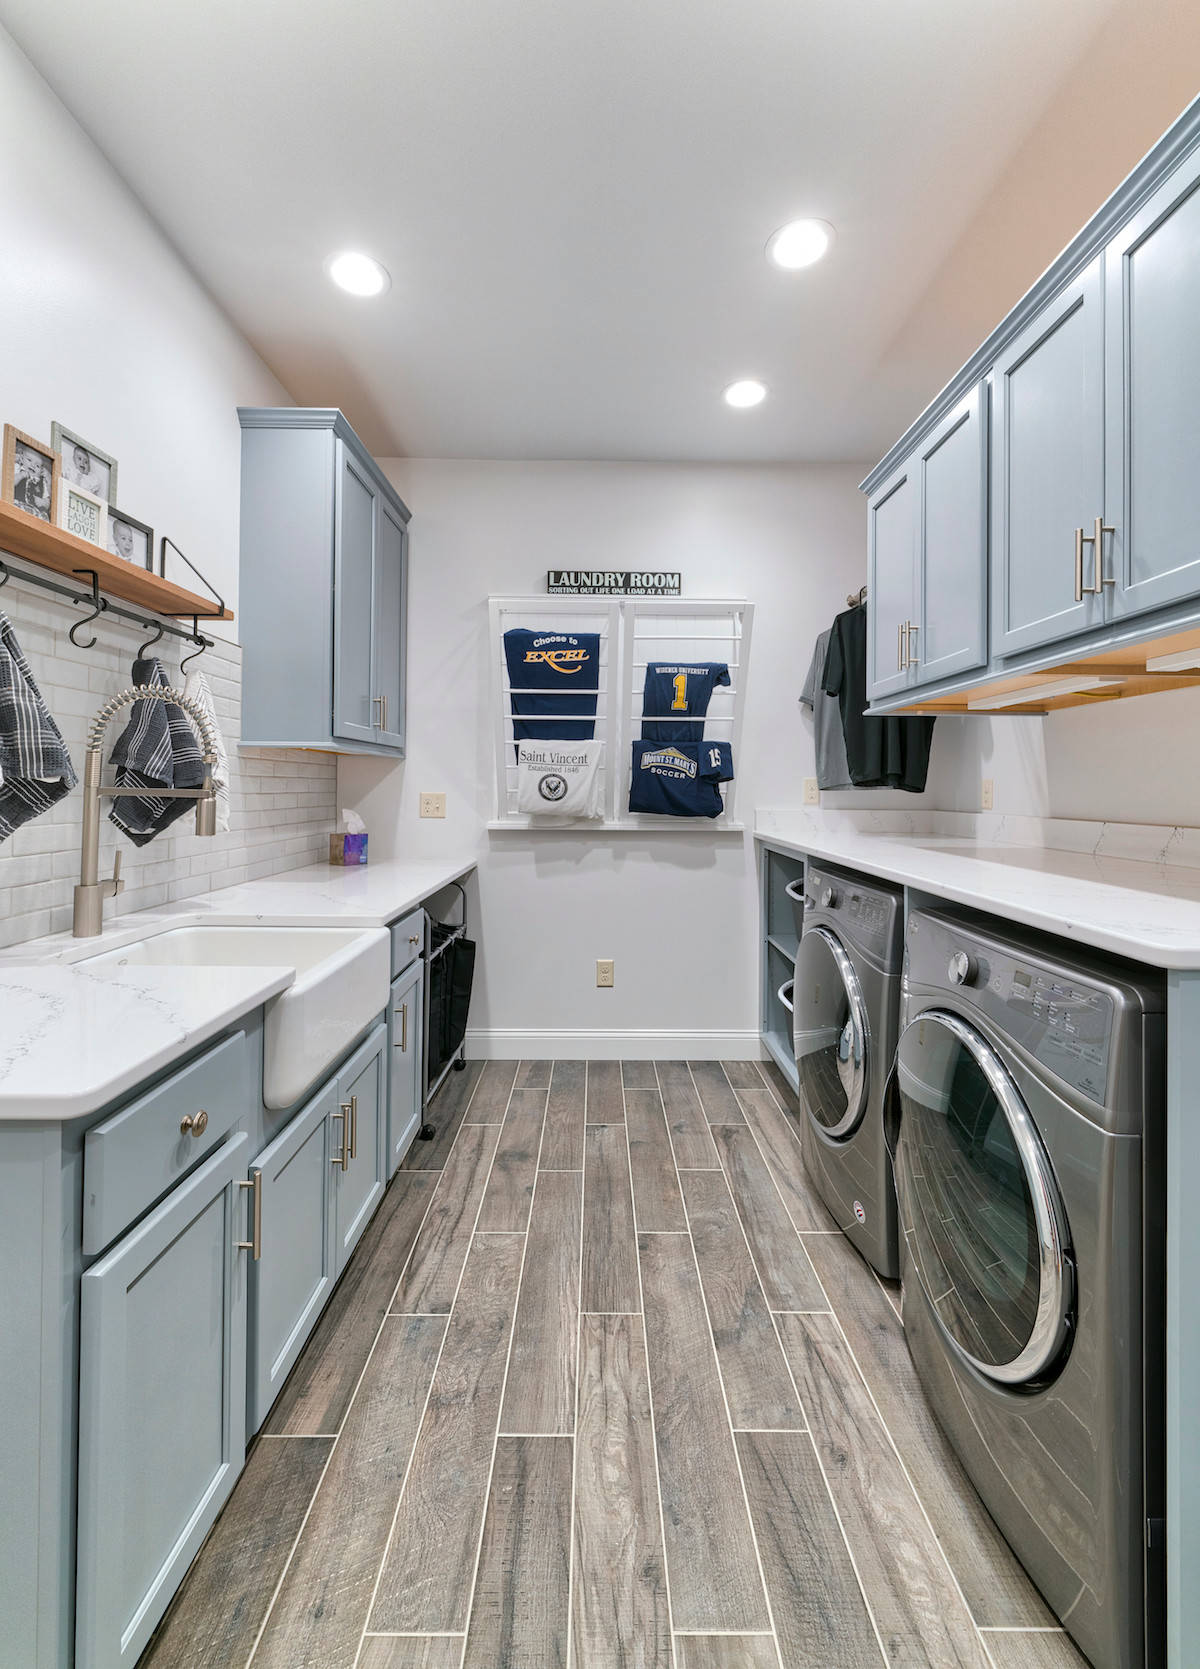 Laundry room countertop ideas: 8 materials and layouts to inspire